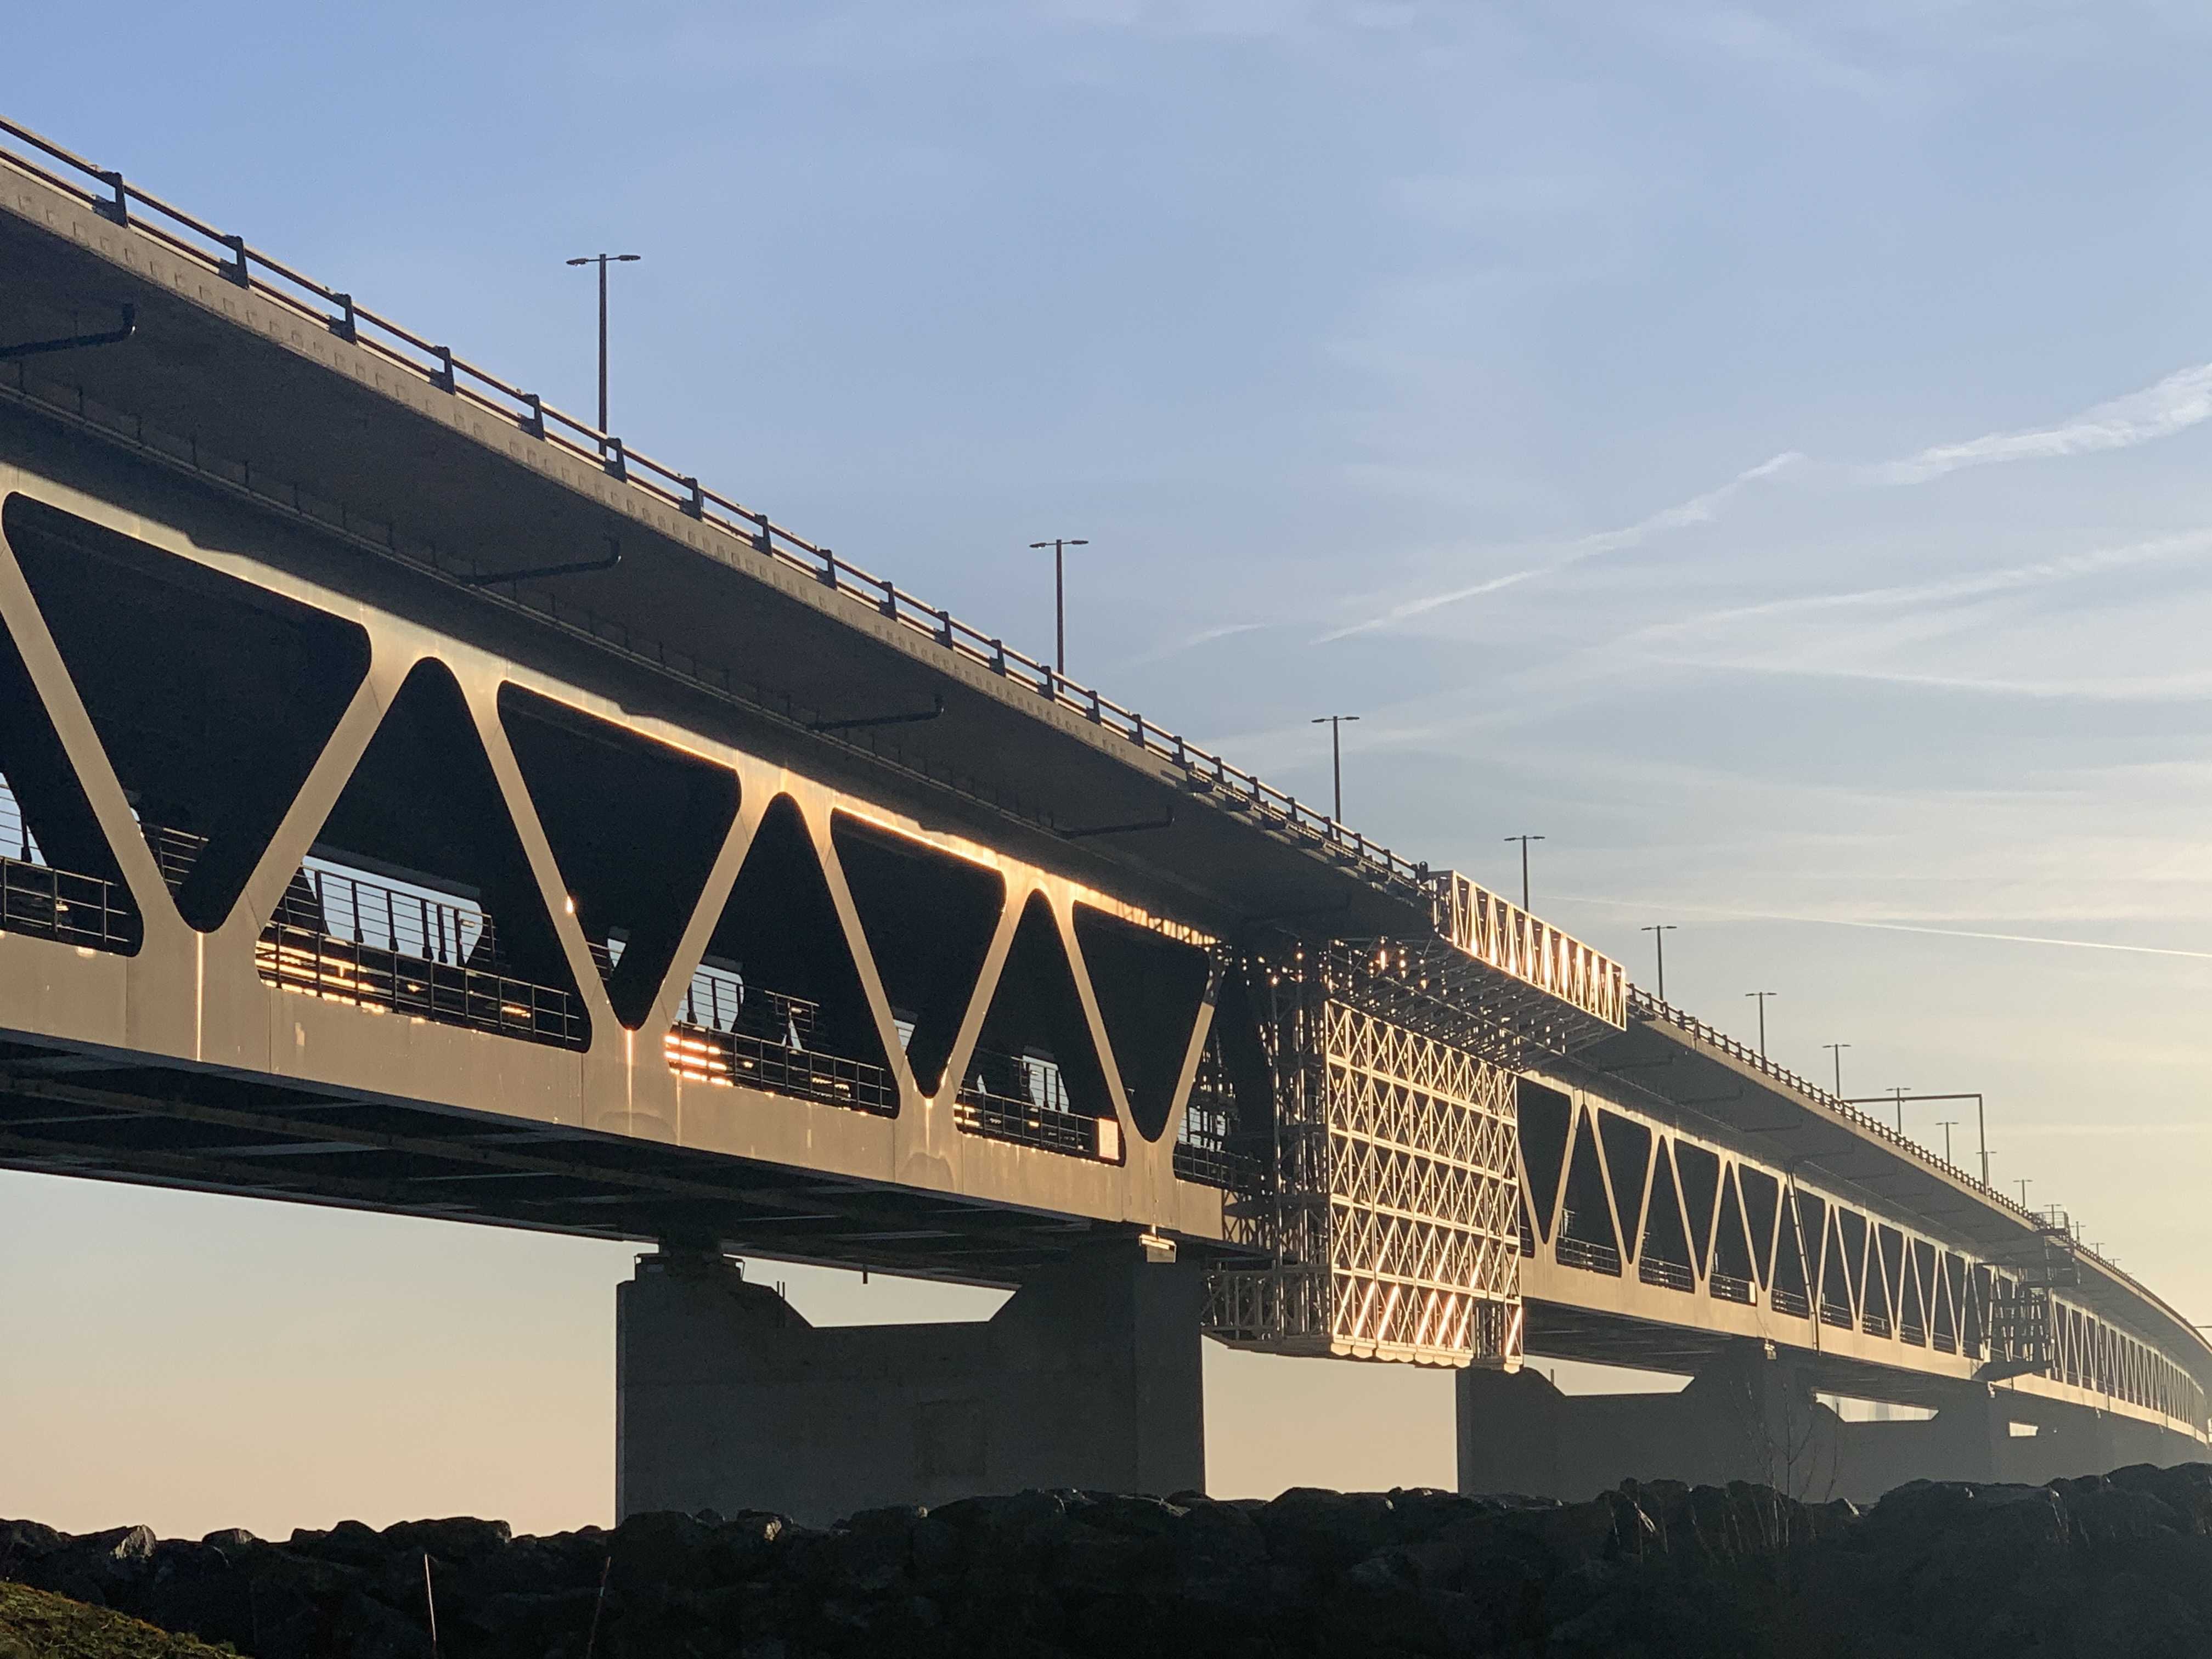 Find out why RD-Monoguard has been chosen to renovate one of the largest bridge in Europa